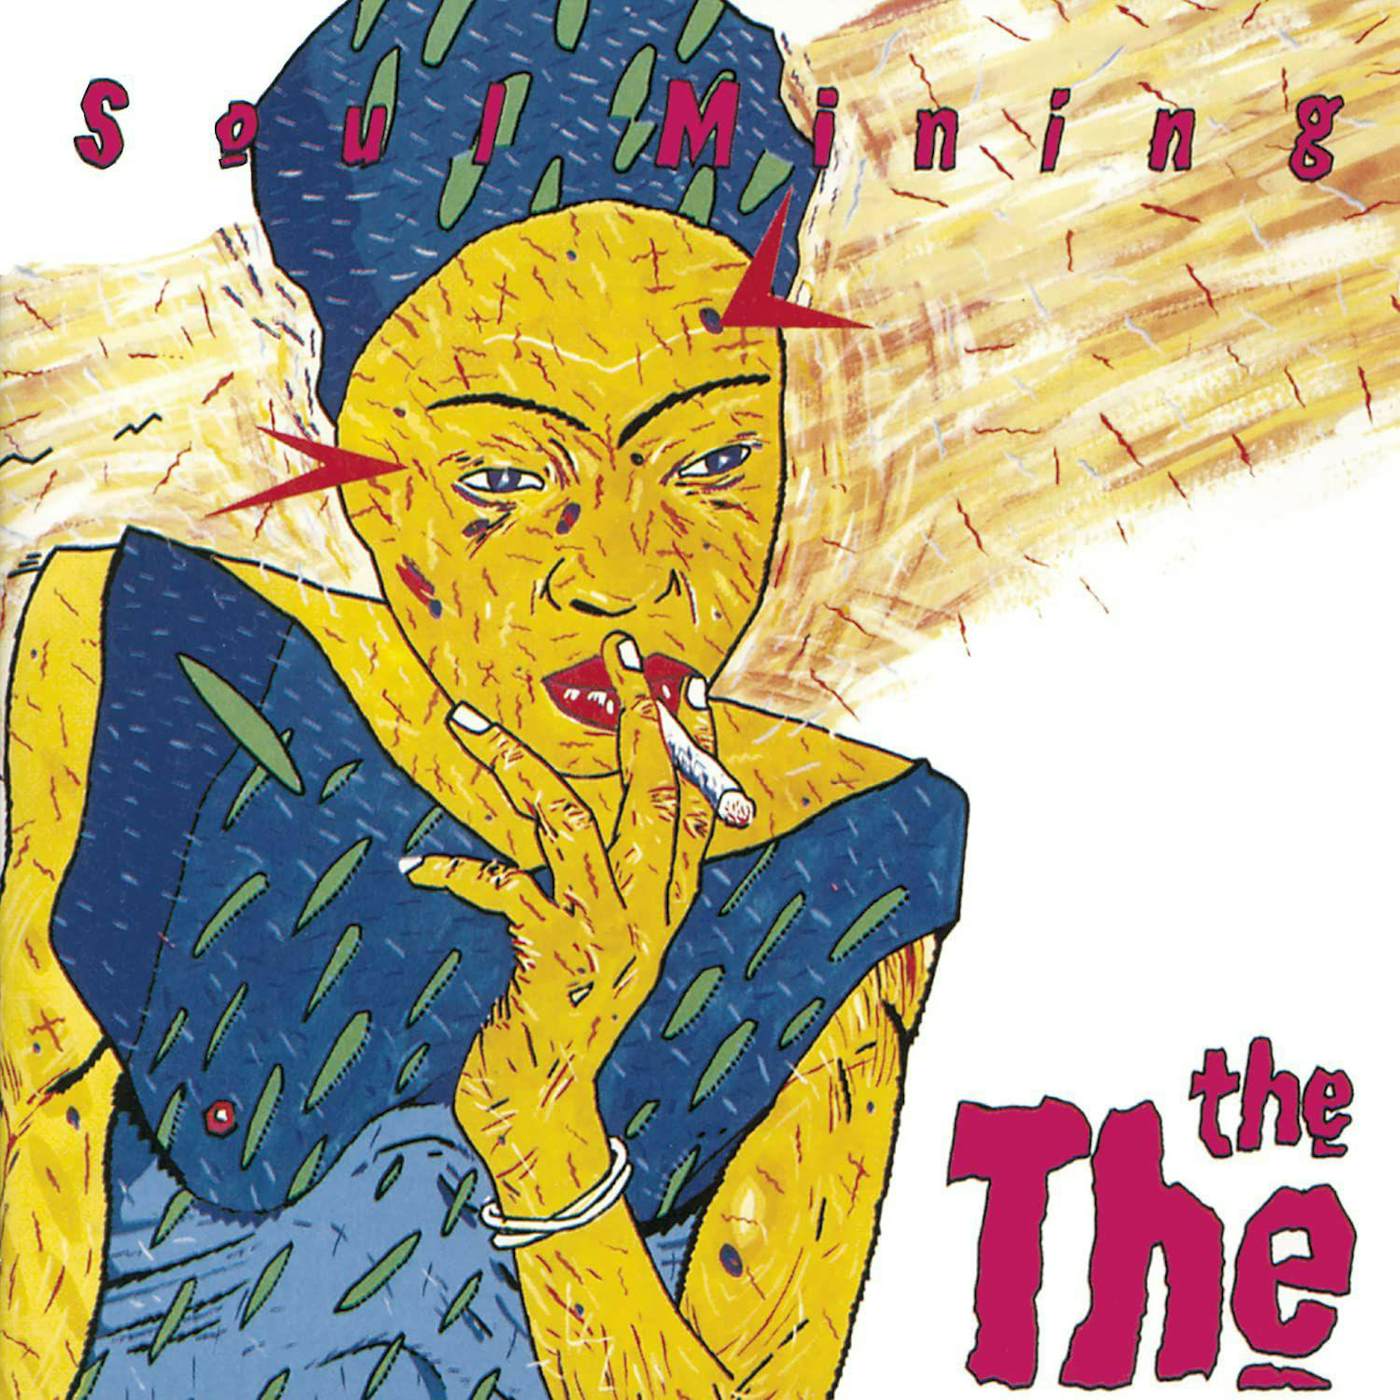 The The Soul Mining (30th Anniversary Deluxe Edition) Box Set (Vinyl)